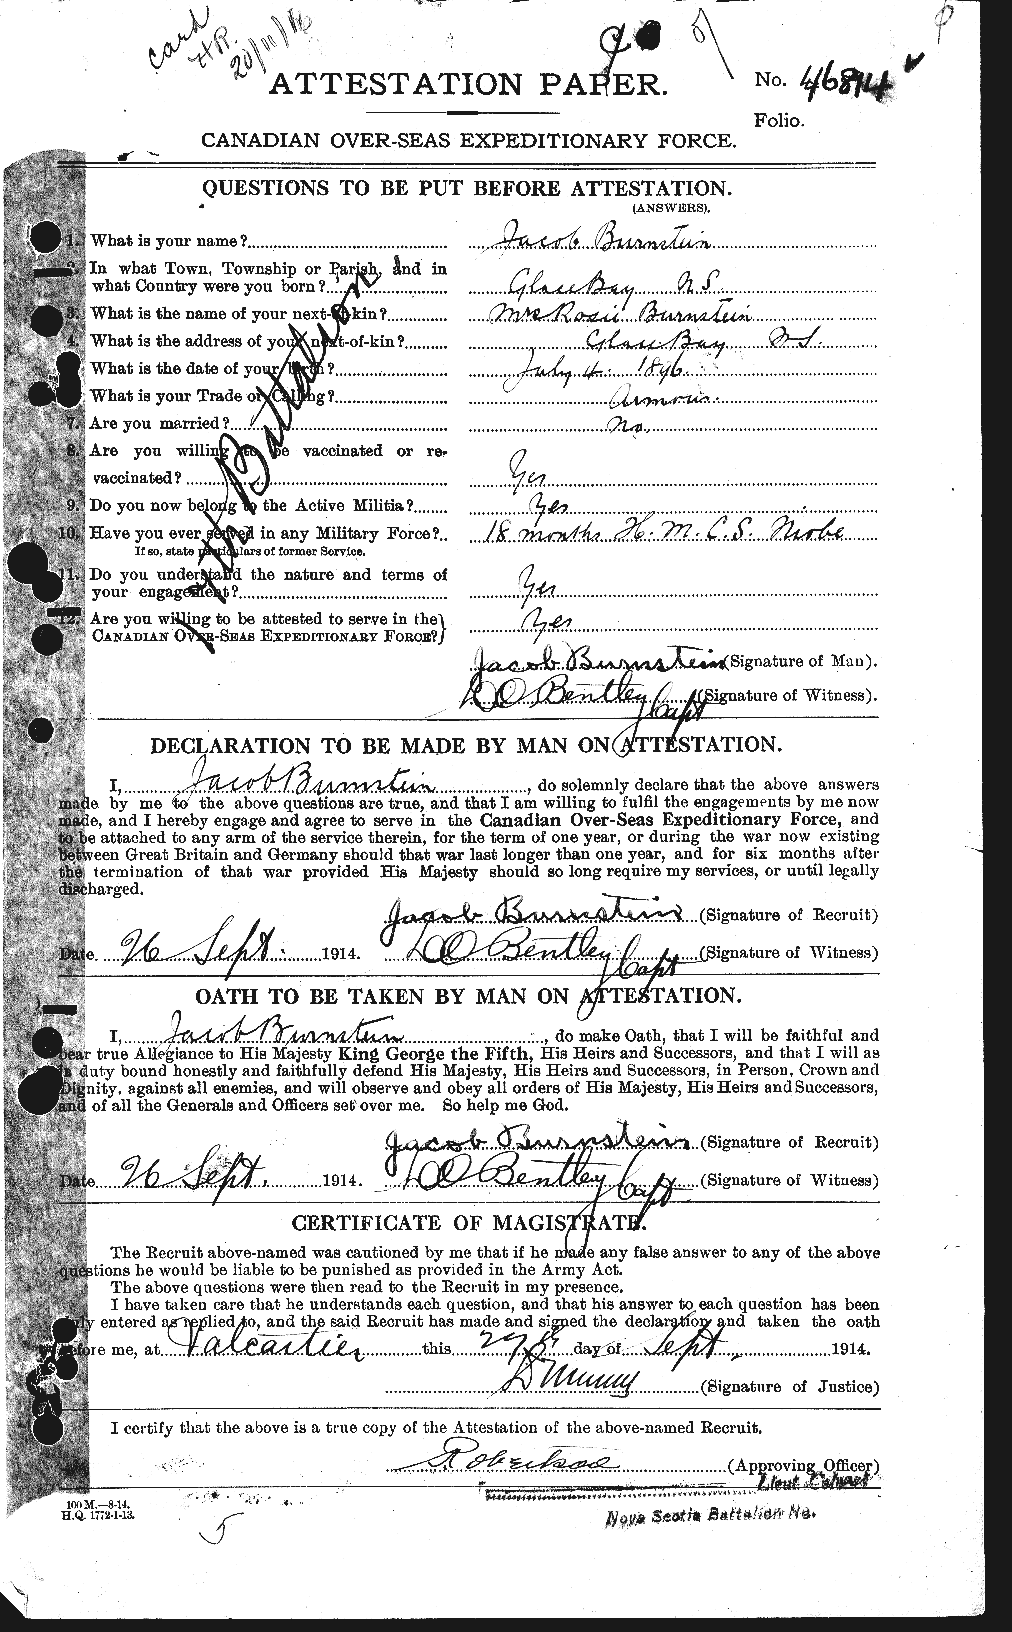 Personnel Records of the First World War - CEF 273888a